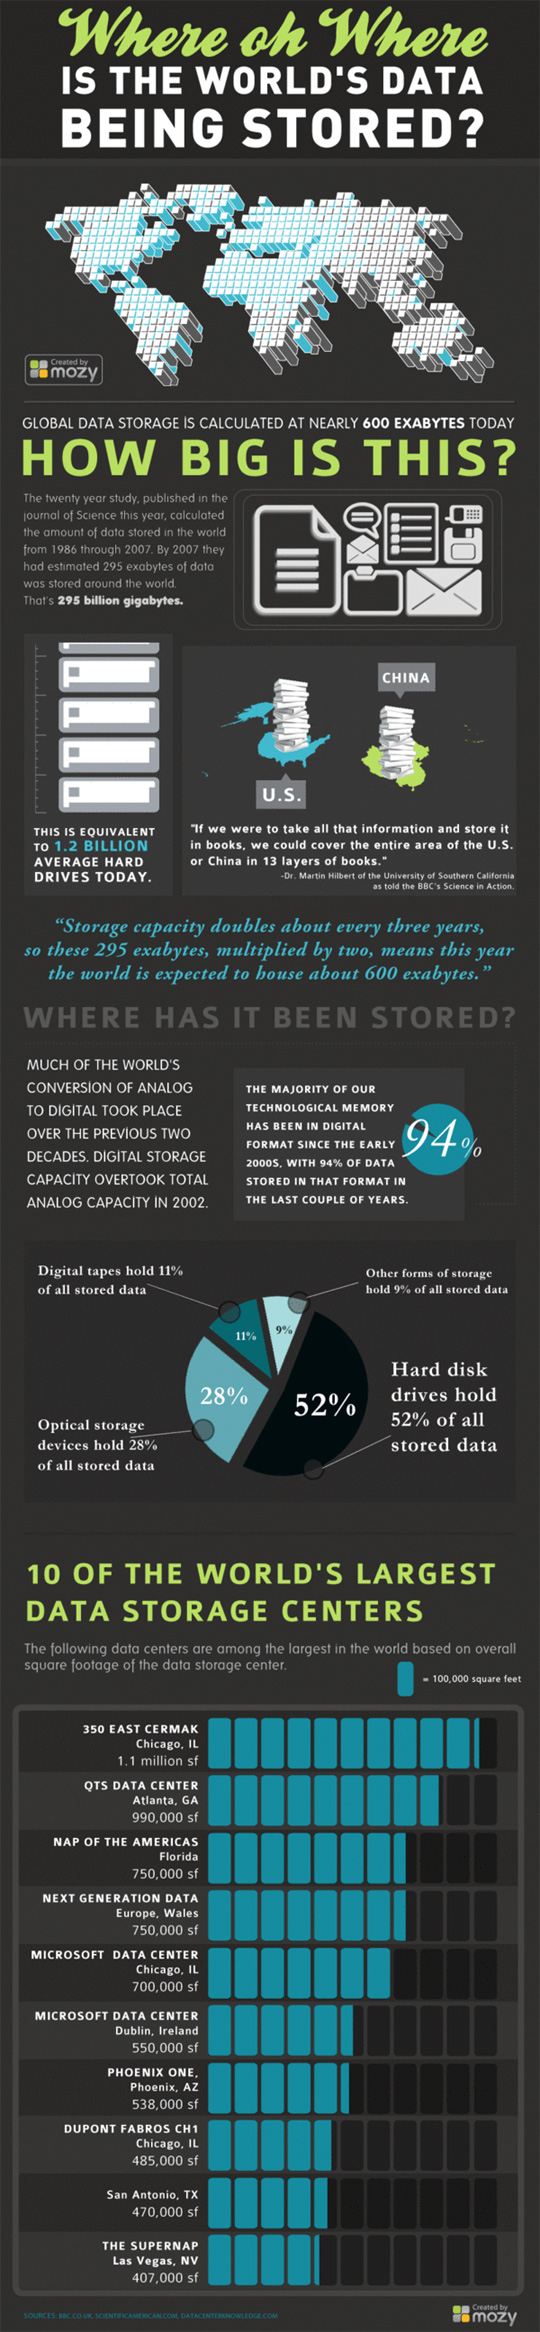 Where Oh Where: Current State Of World's Data Storage (Infographic) 6